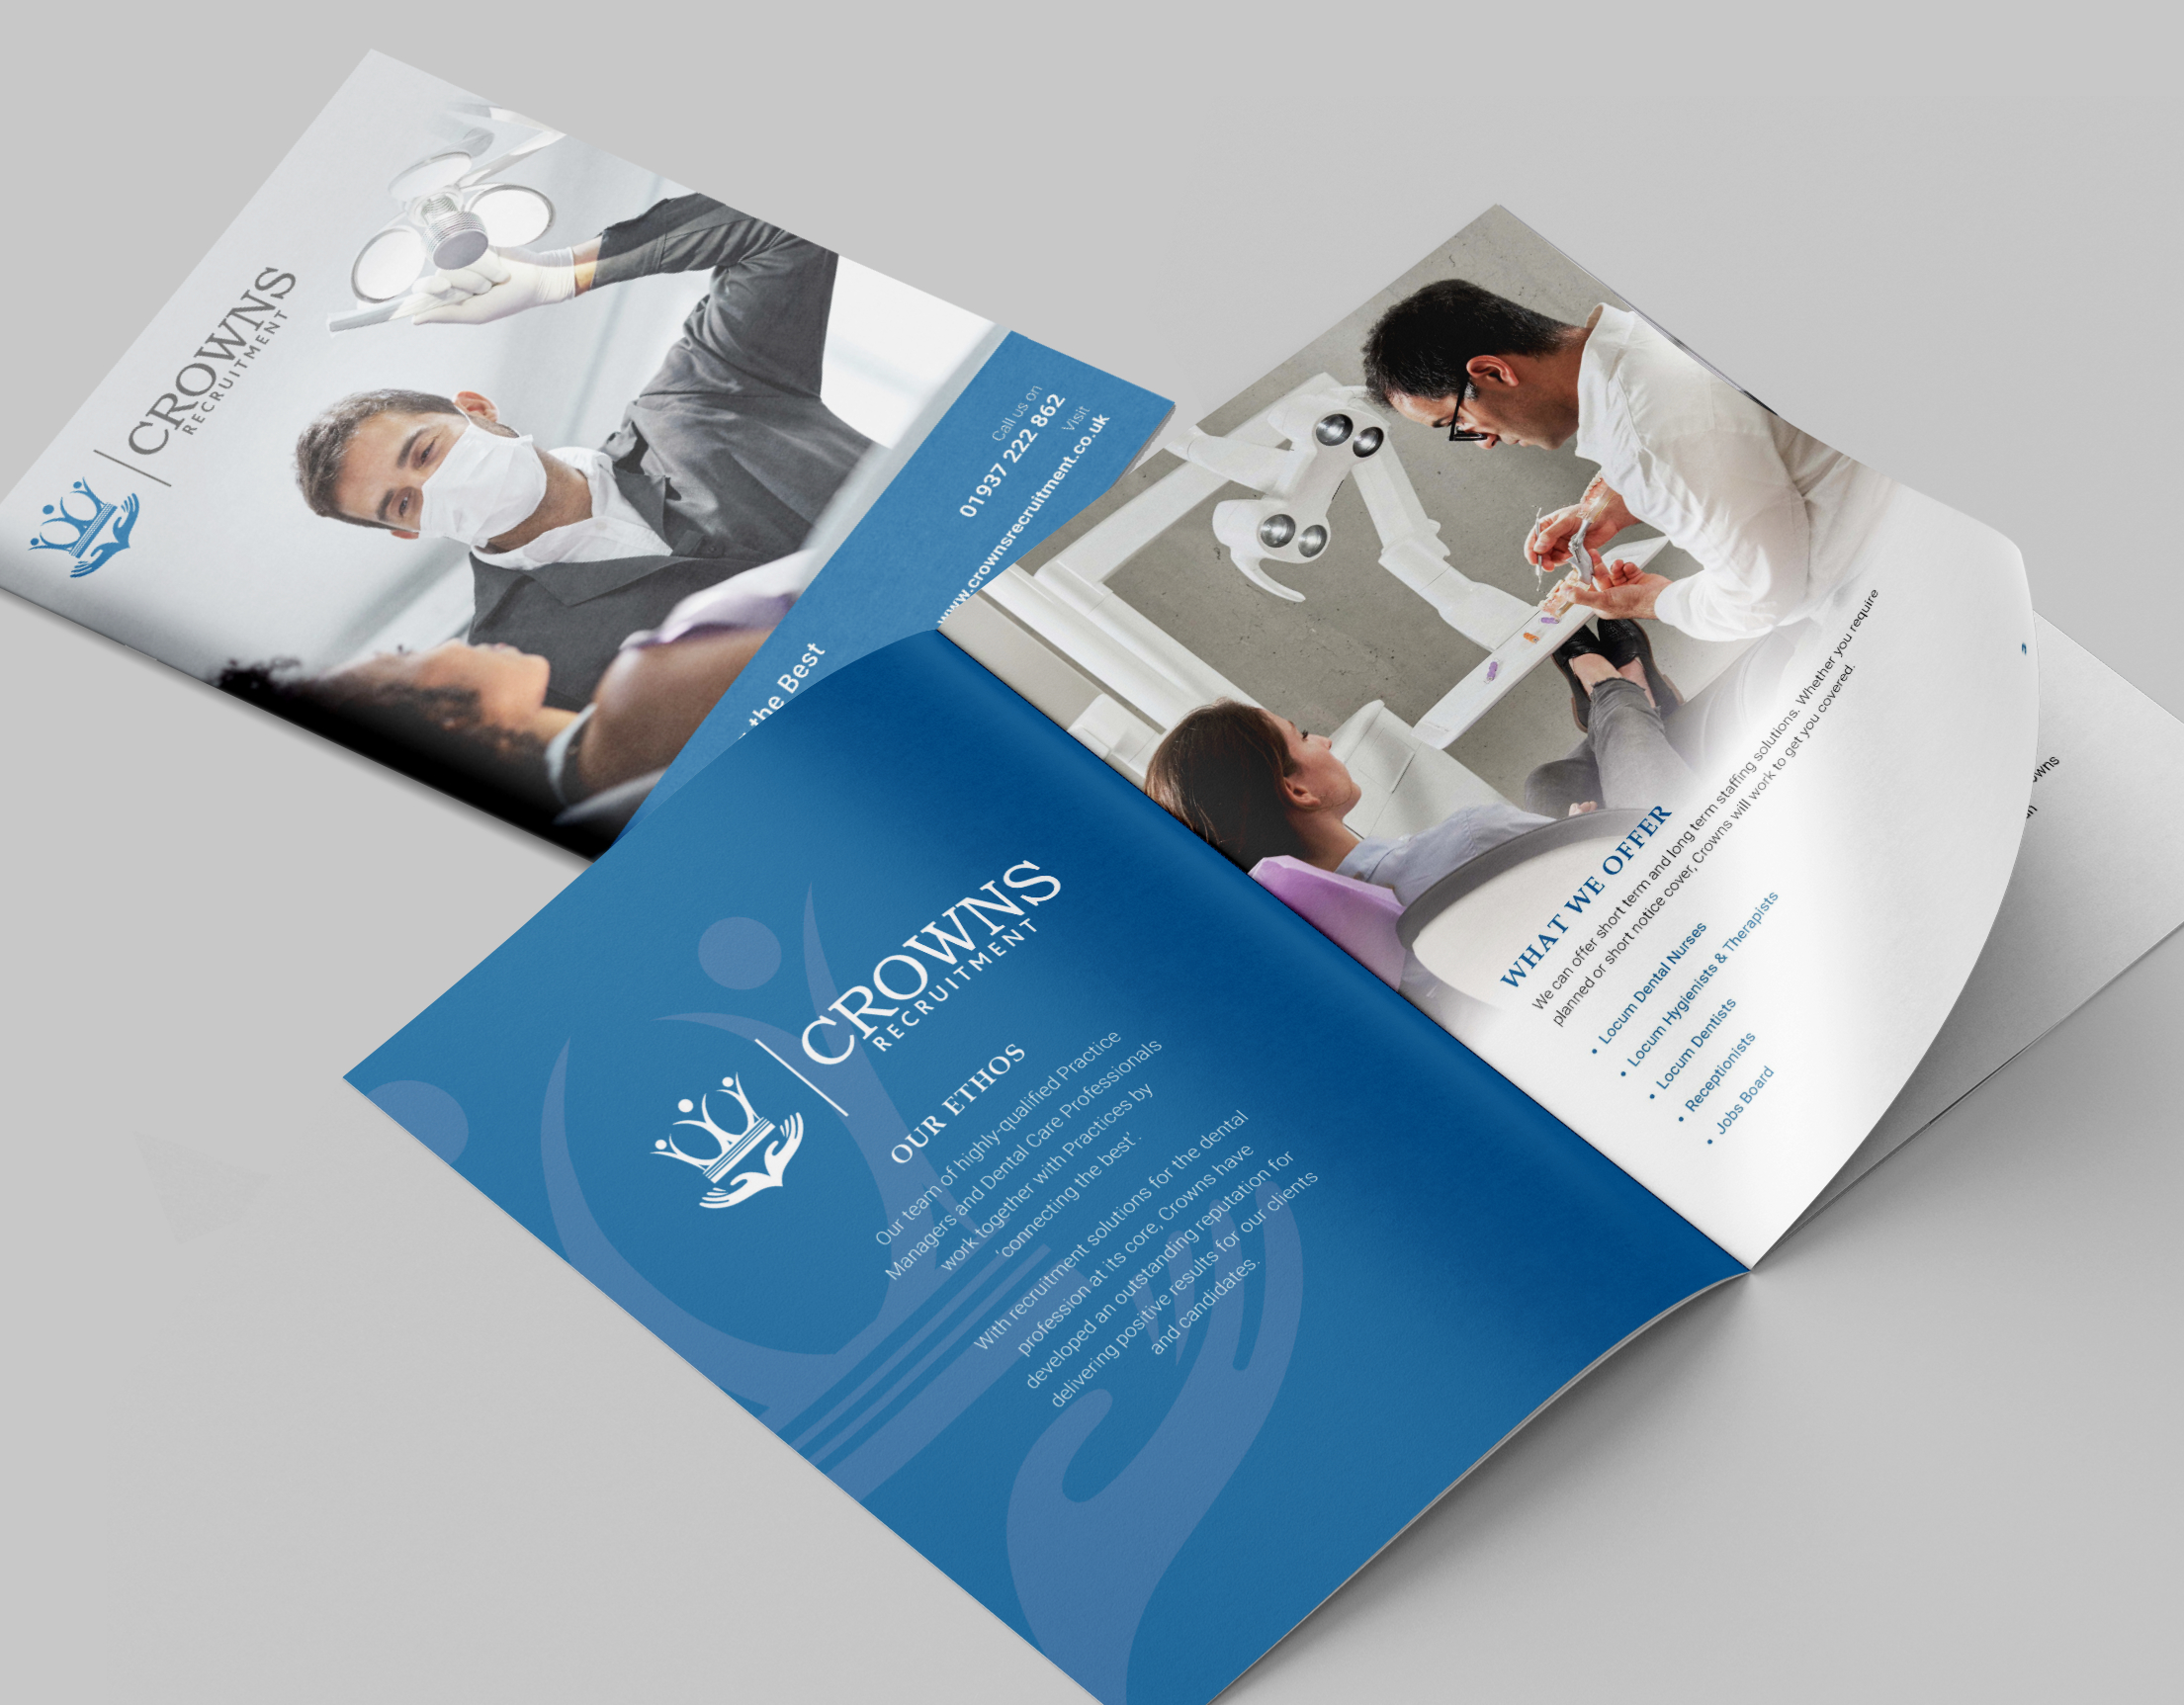 Graphic design for layout and print, including logo and branding.